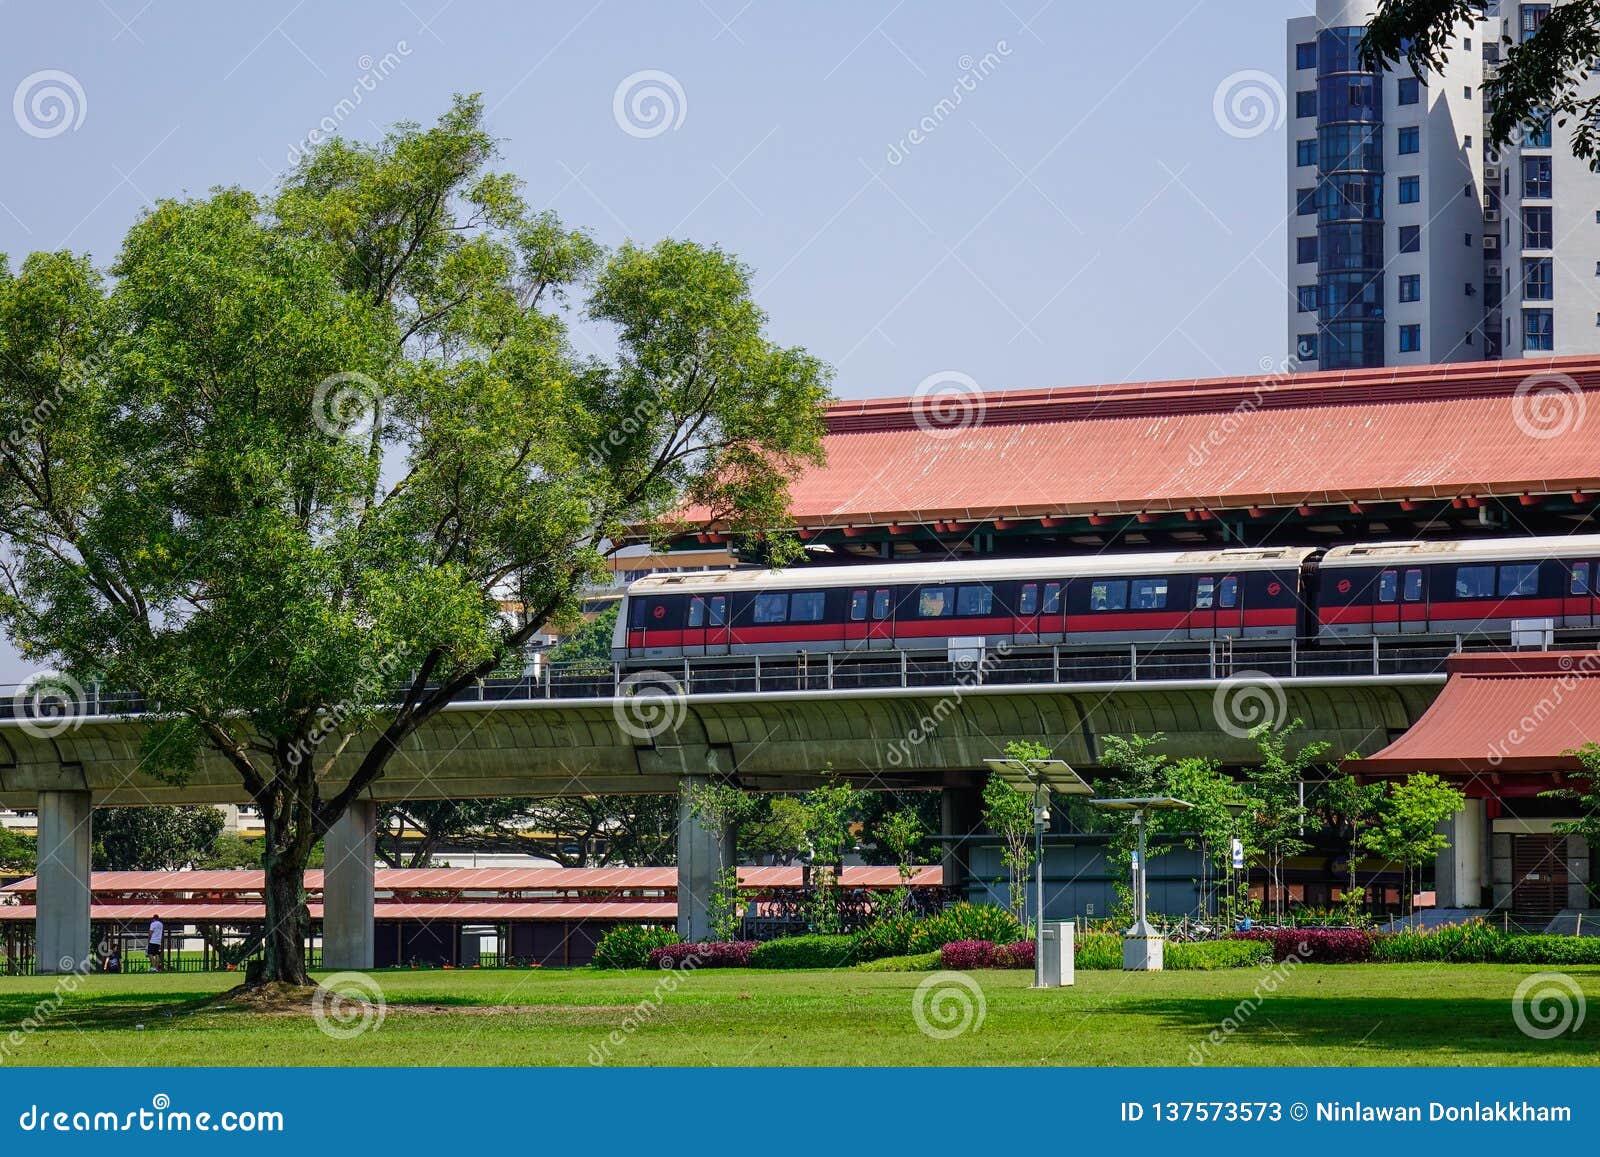 Jurong Road Photos Free Royalty Free Stock Photos From Dreamstime